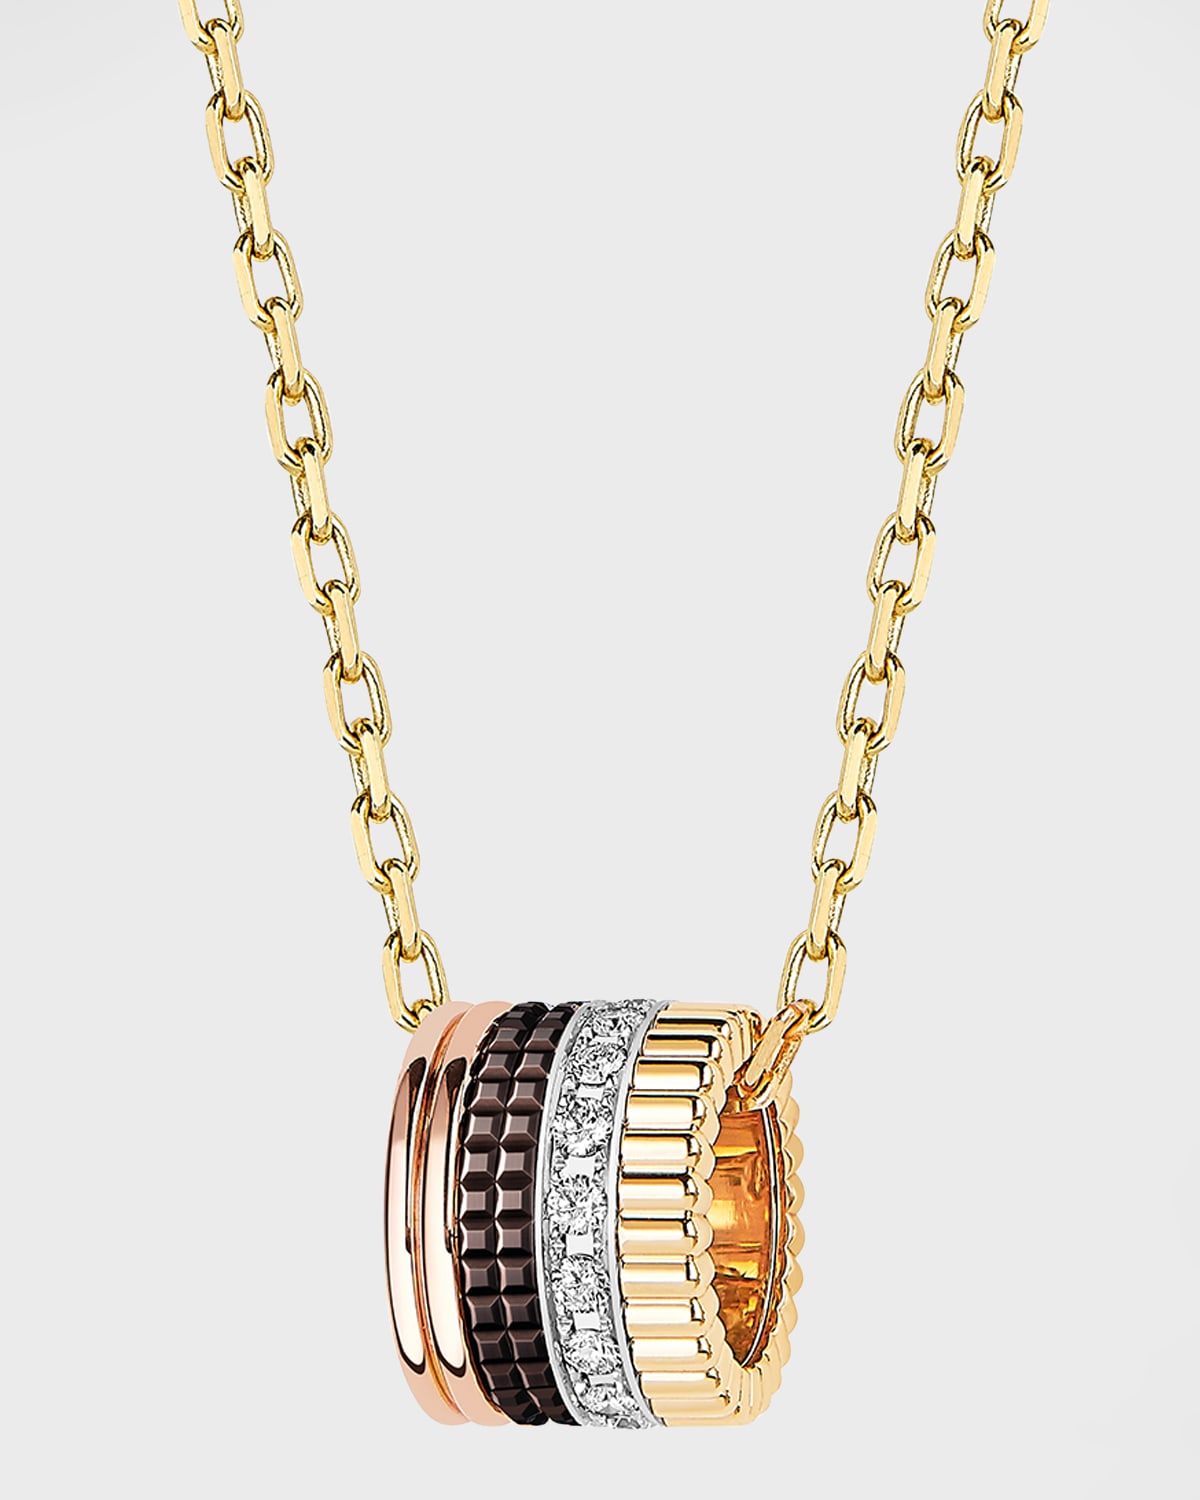 Yellow, Pink and White Gold Quatre Large Diamond Pendant Necklace